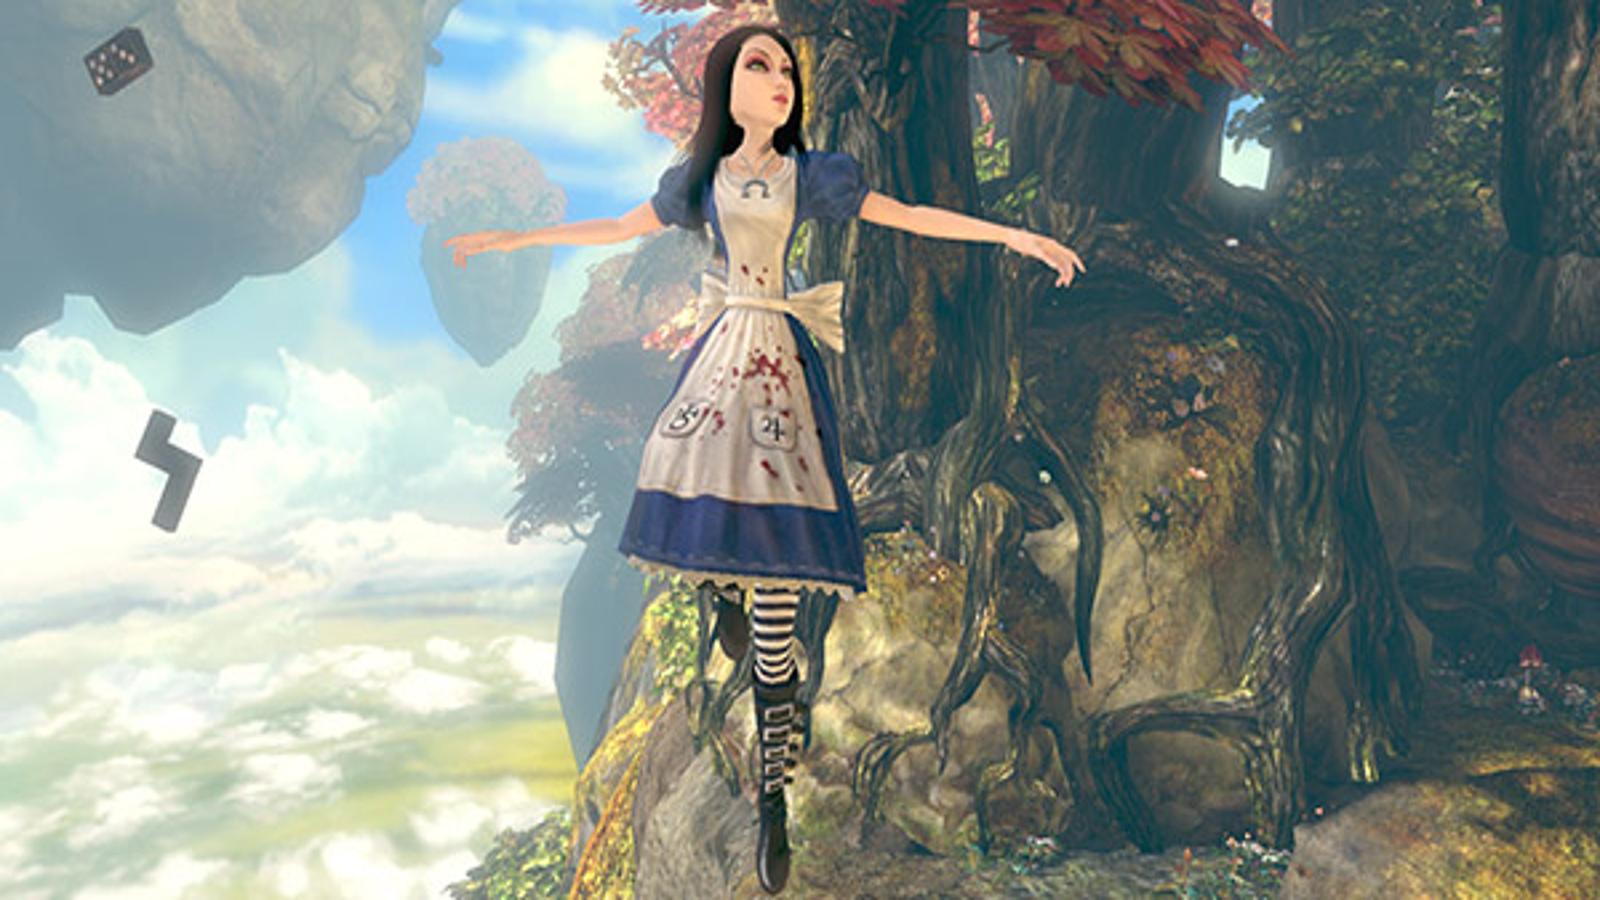 EA reveals Alice: Madness Returns for PC, Xbox 360 and